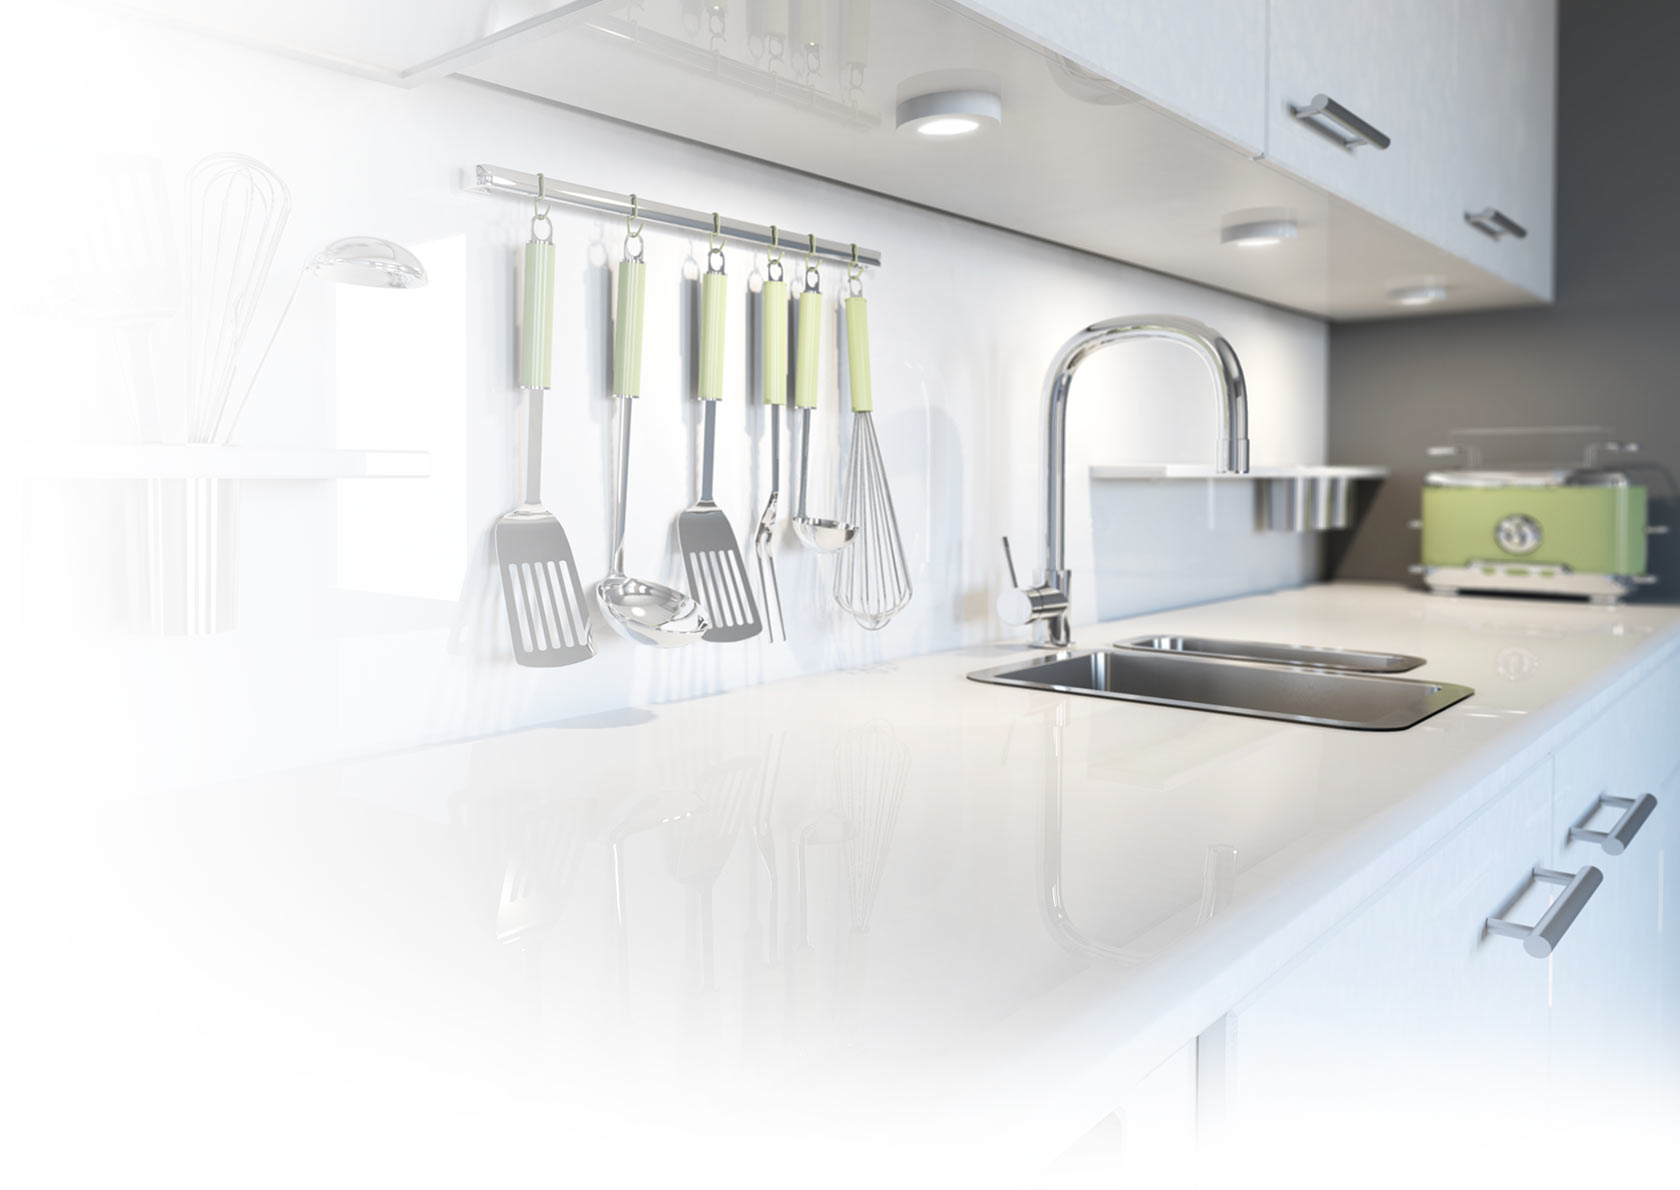 Water systems and faucets for kitchen